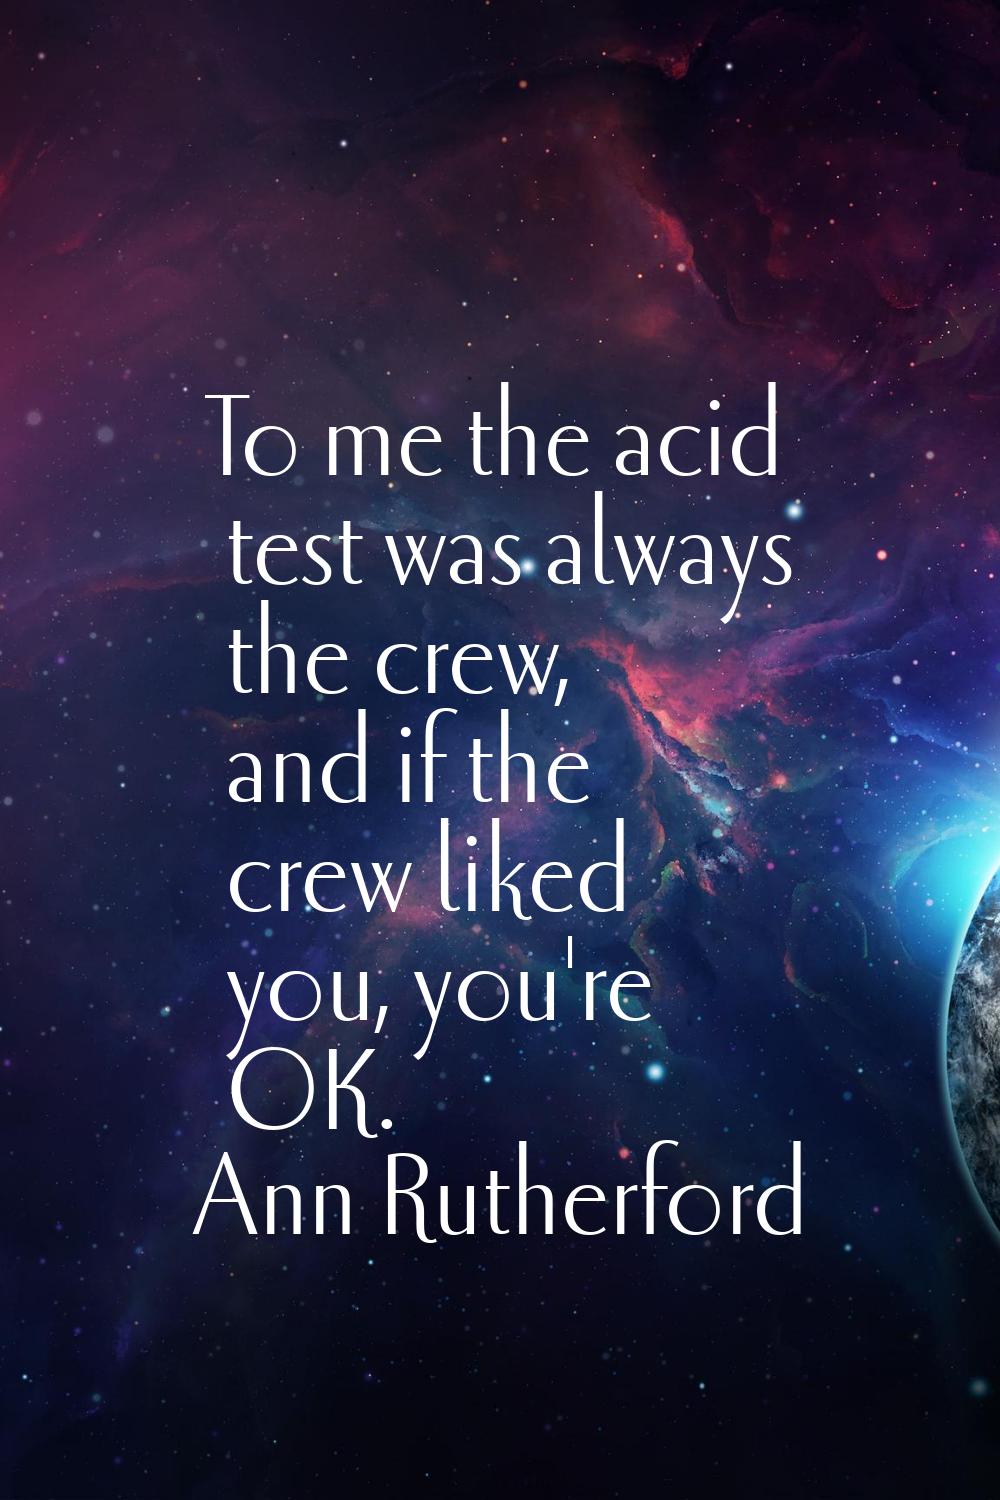 To me the acid test was always the crew, and if the crew liked you, you're OK.